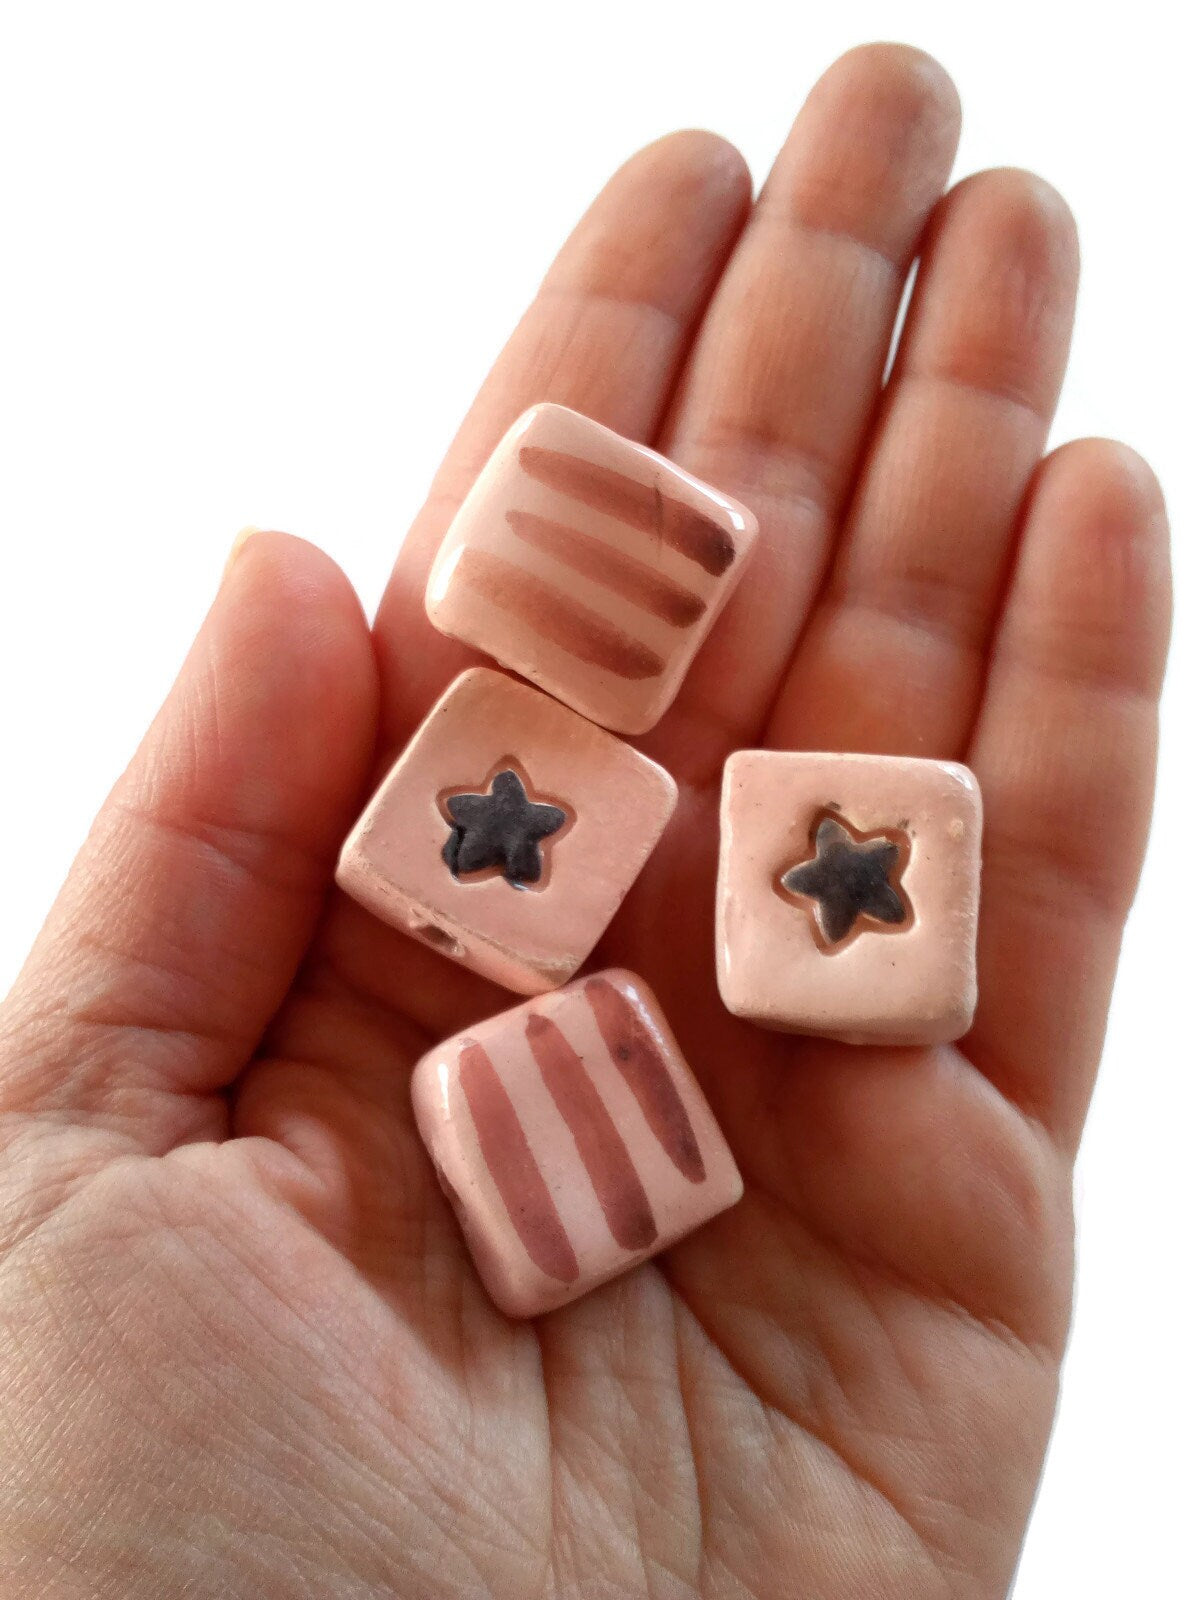 Set Of 4 Assorted Beads, Clay Beads For Crafts, Handmade Ceramic Macrame Beads, Square Shape Large Beads, Unusual Pottery Beads - Ceramica Ana Rafael